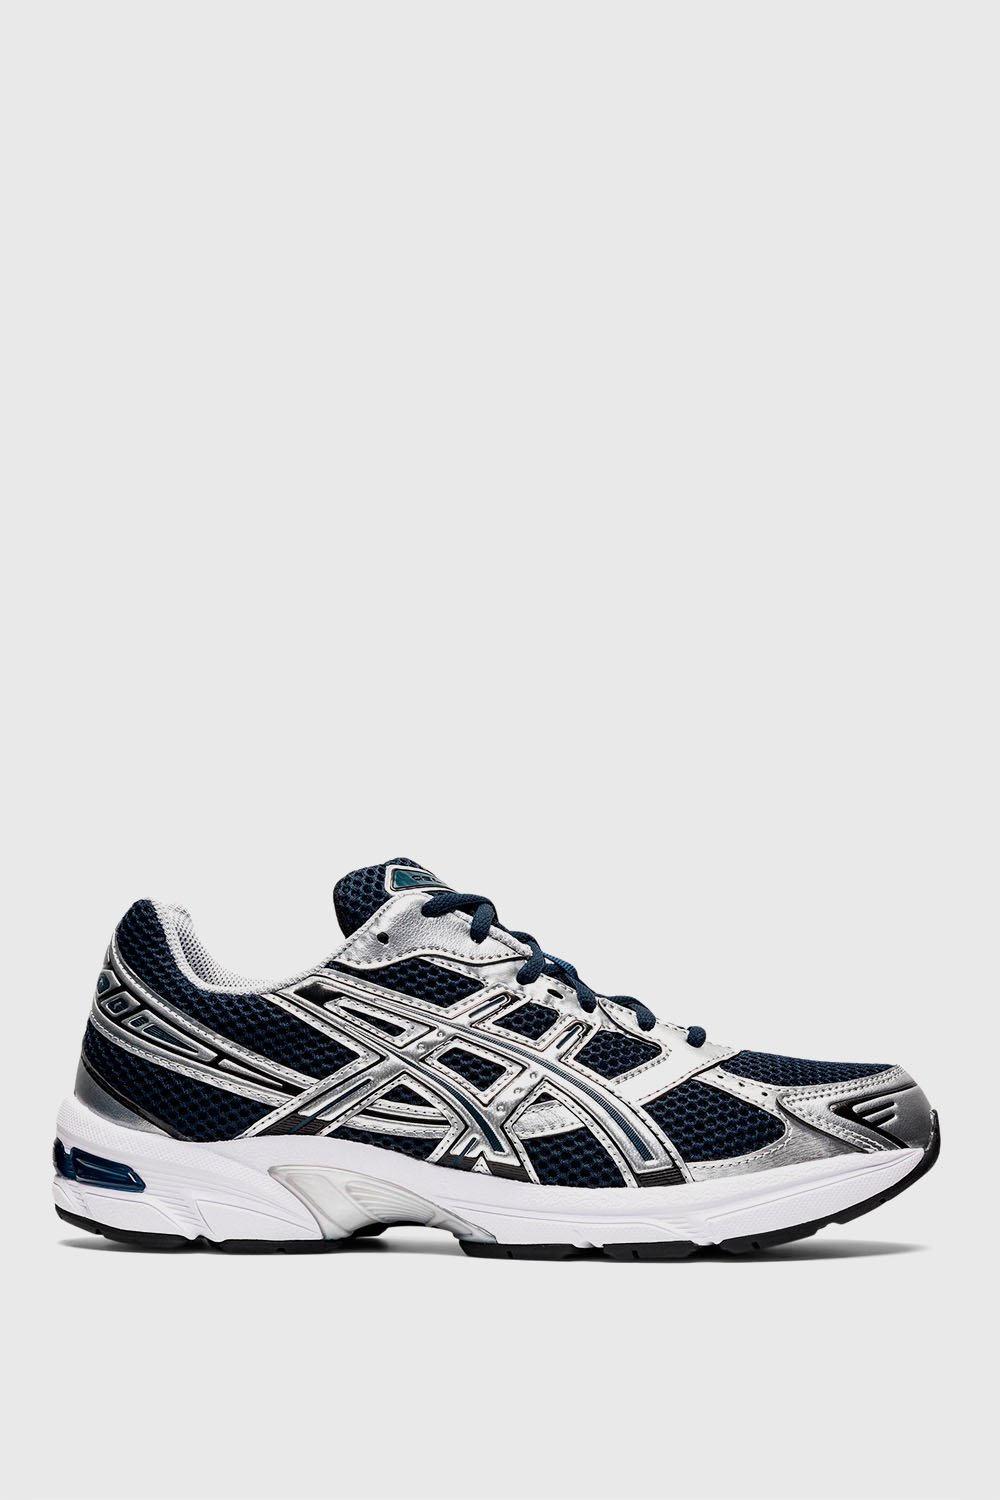 ASICS Gel-1130 French blue/pure silver (400) 